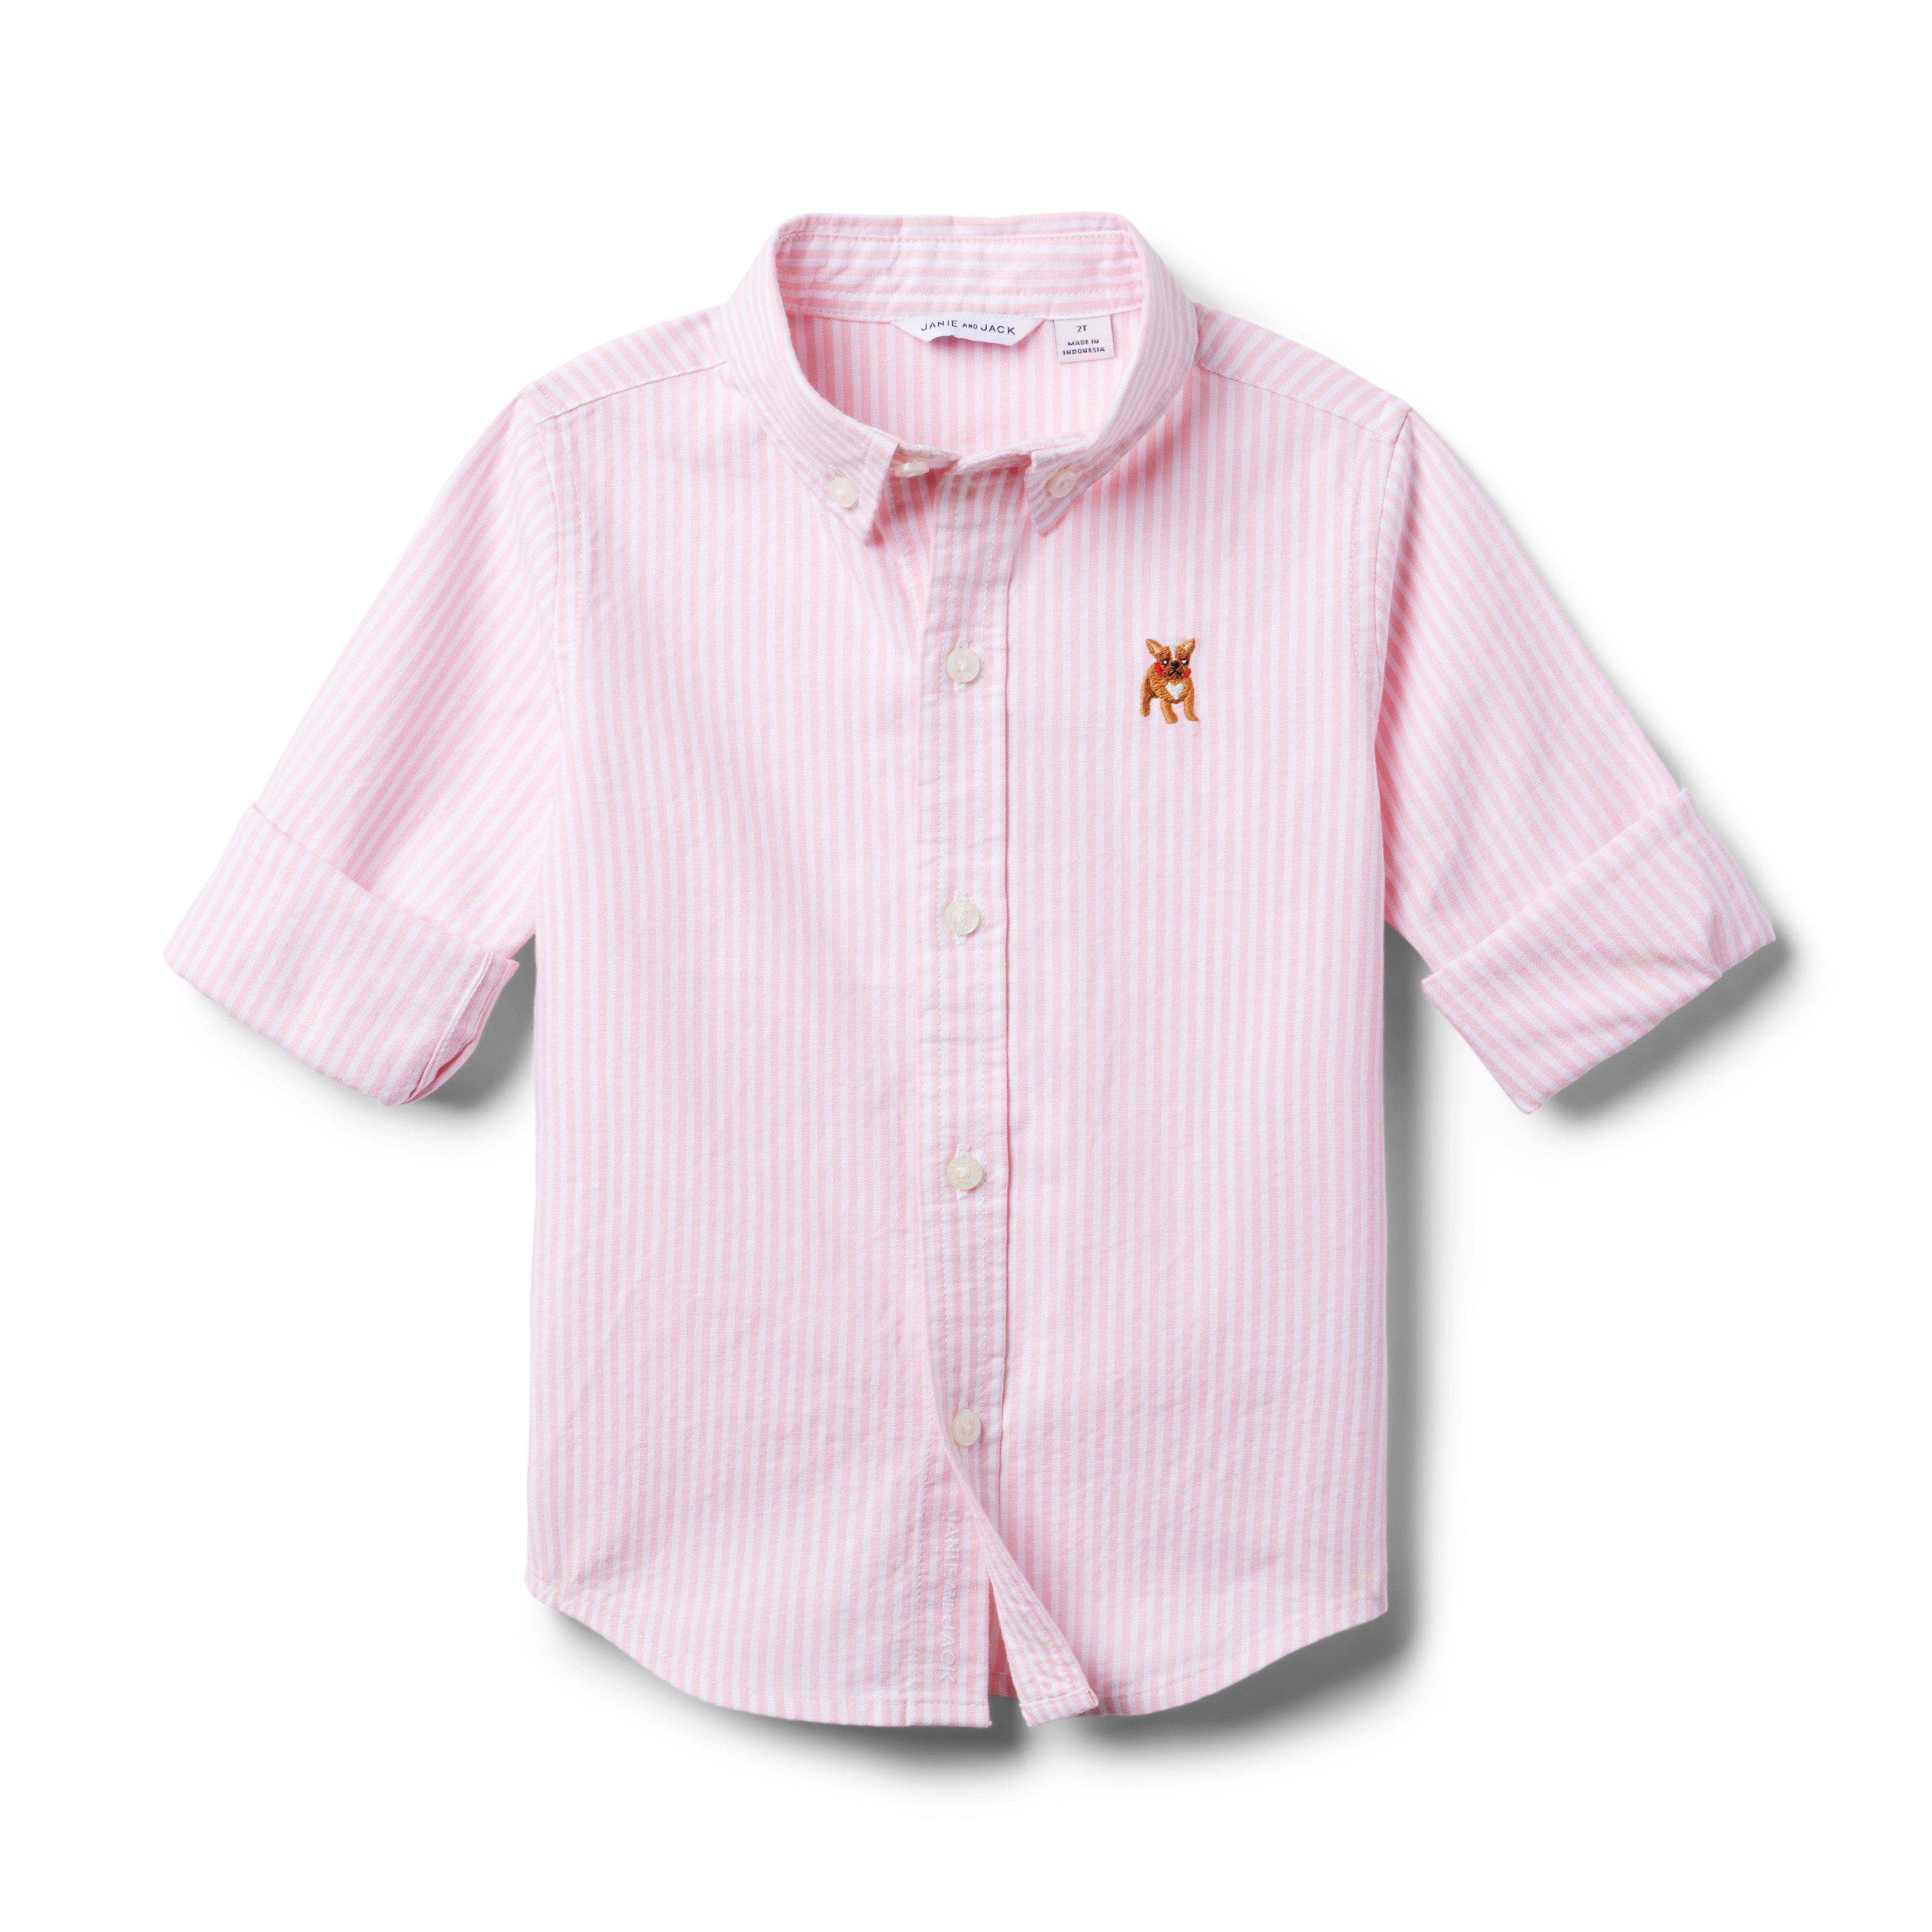 Boy Candy Pink Stripe The Striped Oxford Shirt by Janie and Jack